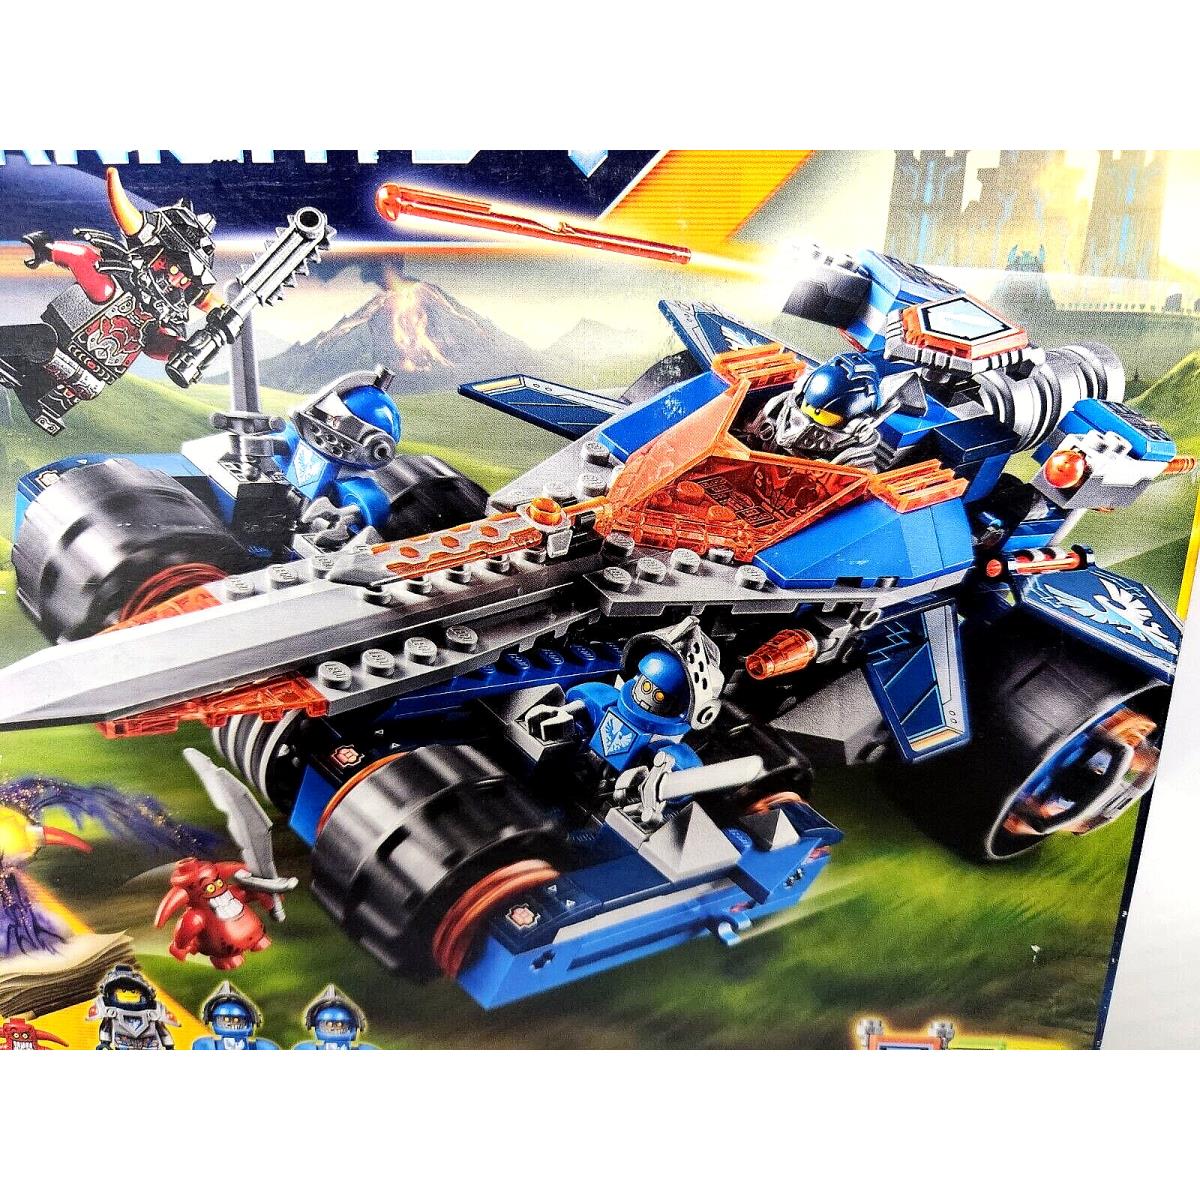 Lego Nexo Knights: 70315 Clay s Rumble Blade 367 Pieces 2016 Retired